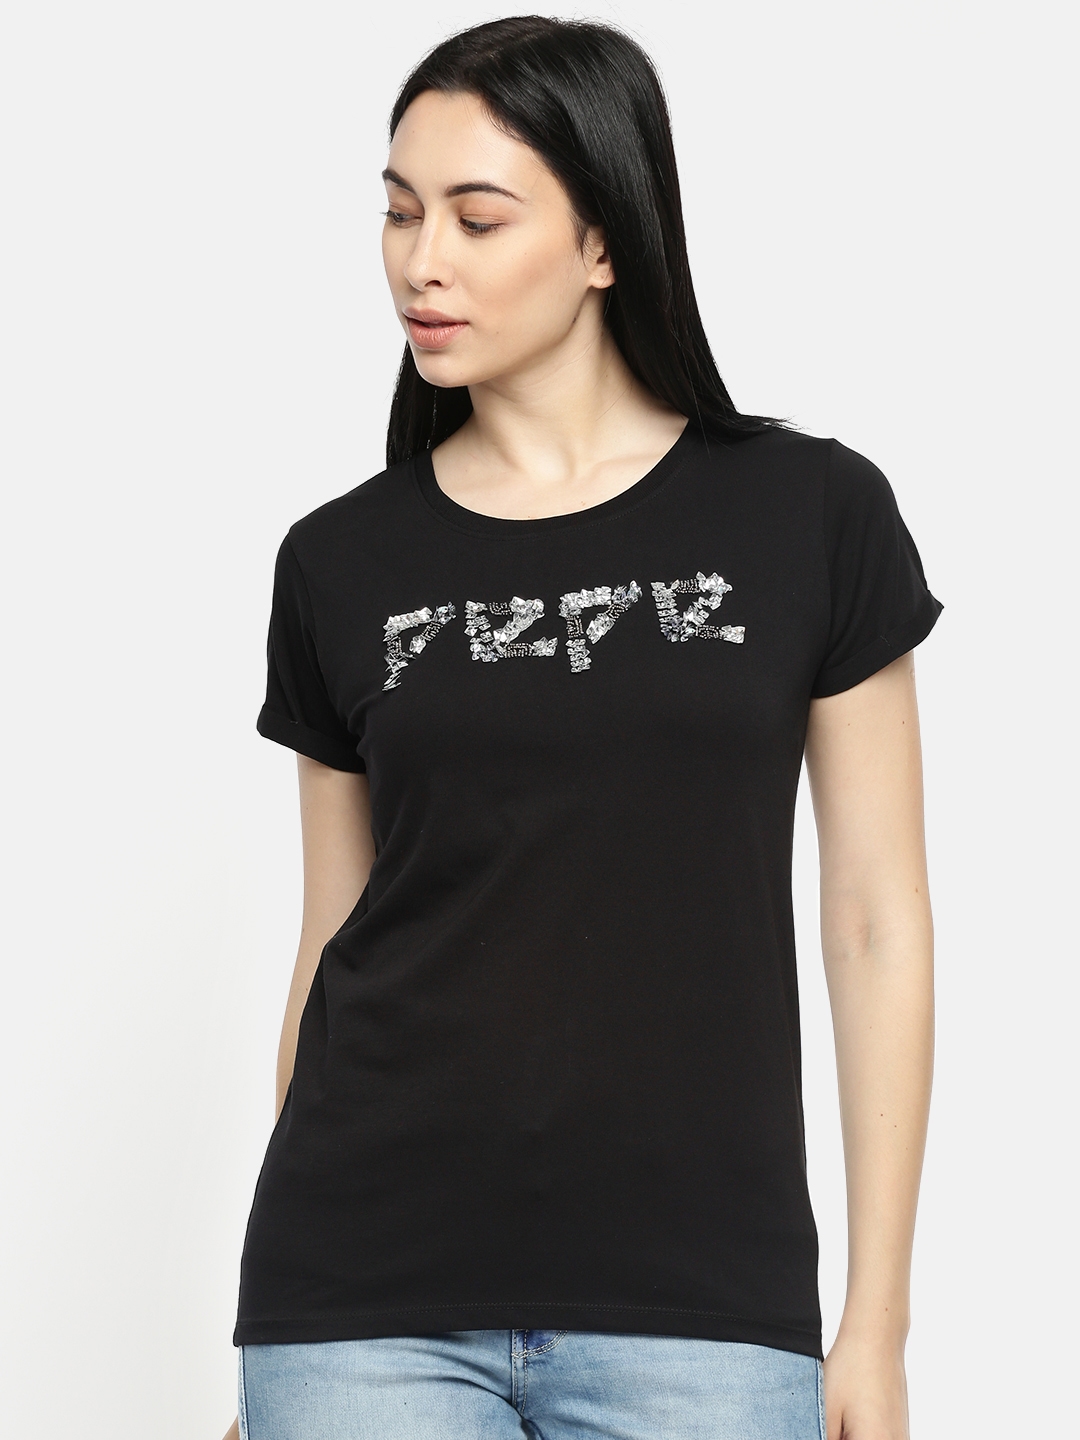 Buy Pepe Jeans Women Black Tshirts Neck Women | - 9025127 Round Shirt Pure T Myntra for Cotton Embellished